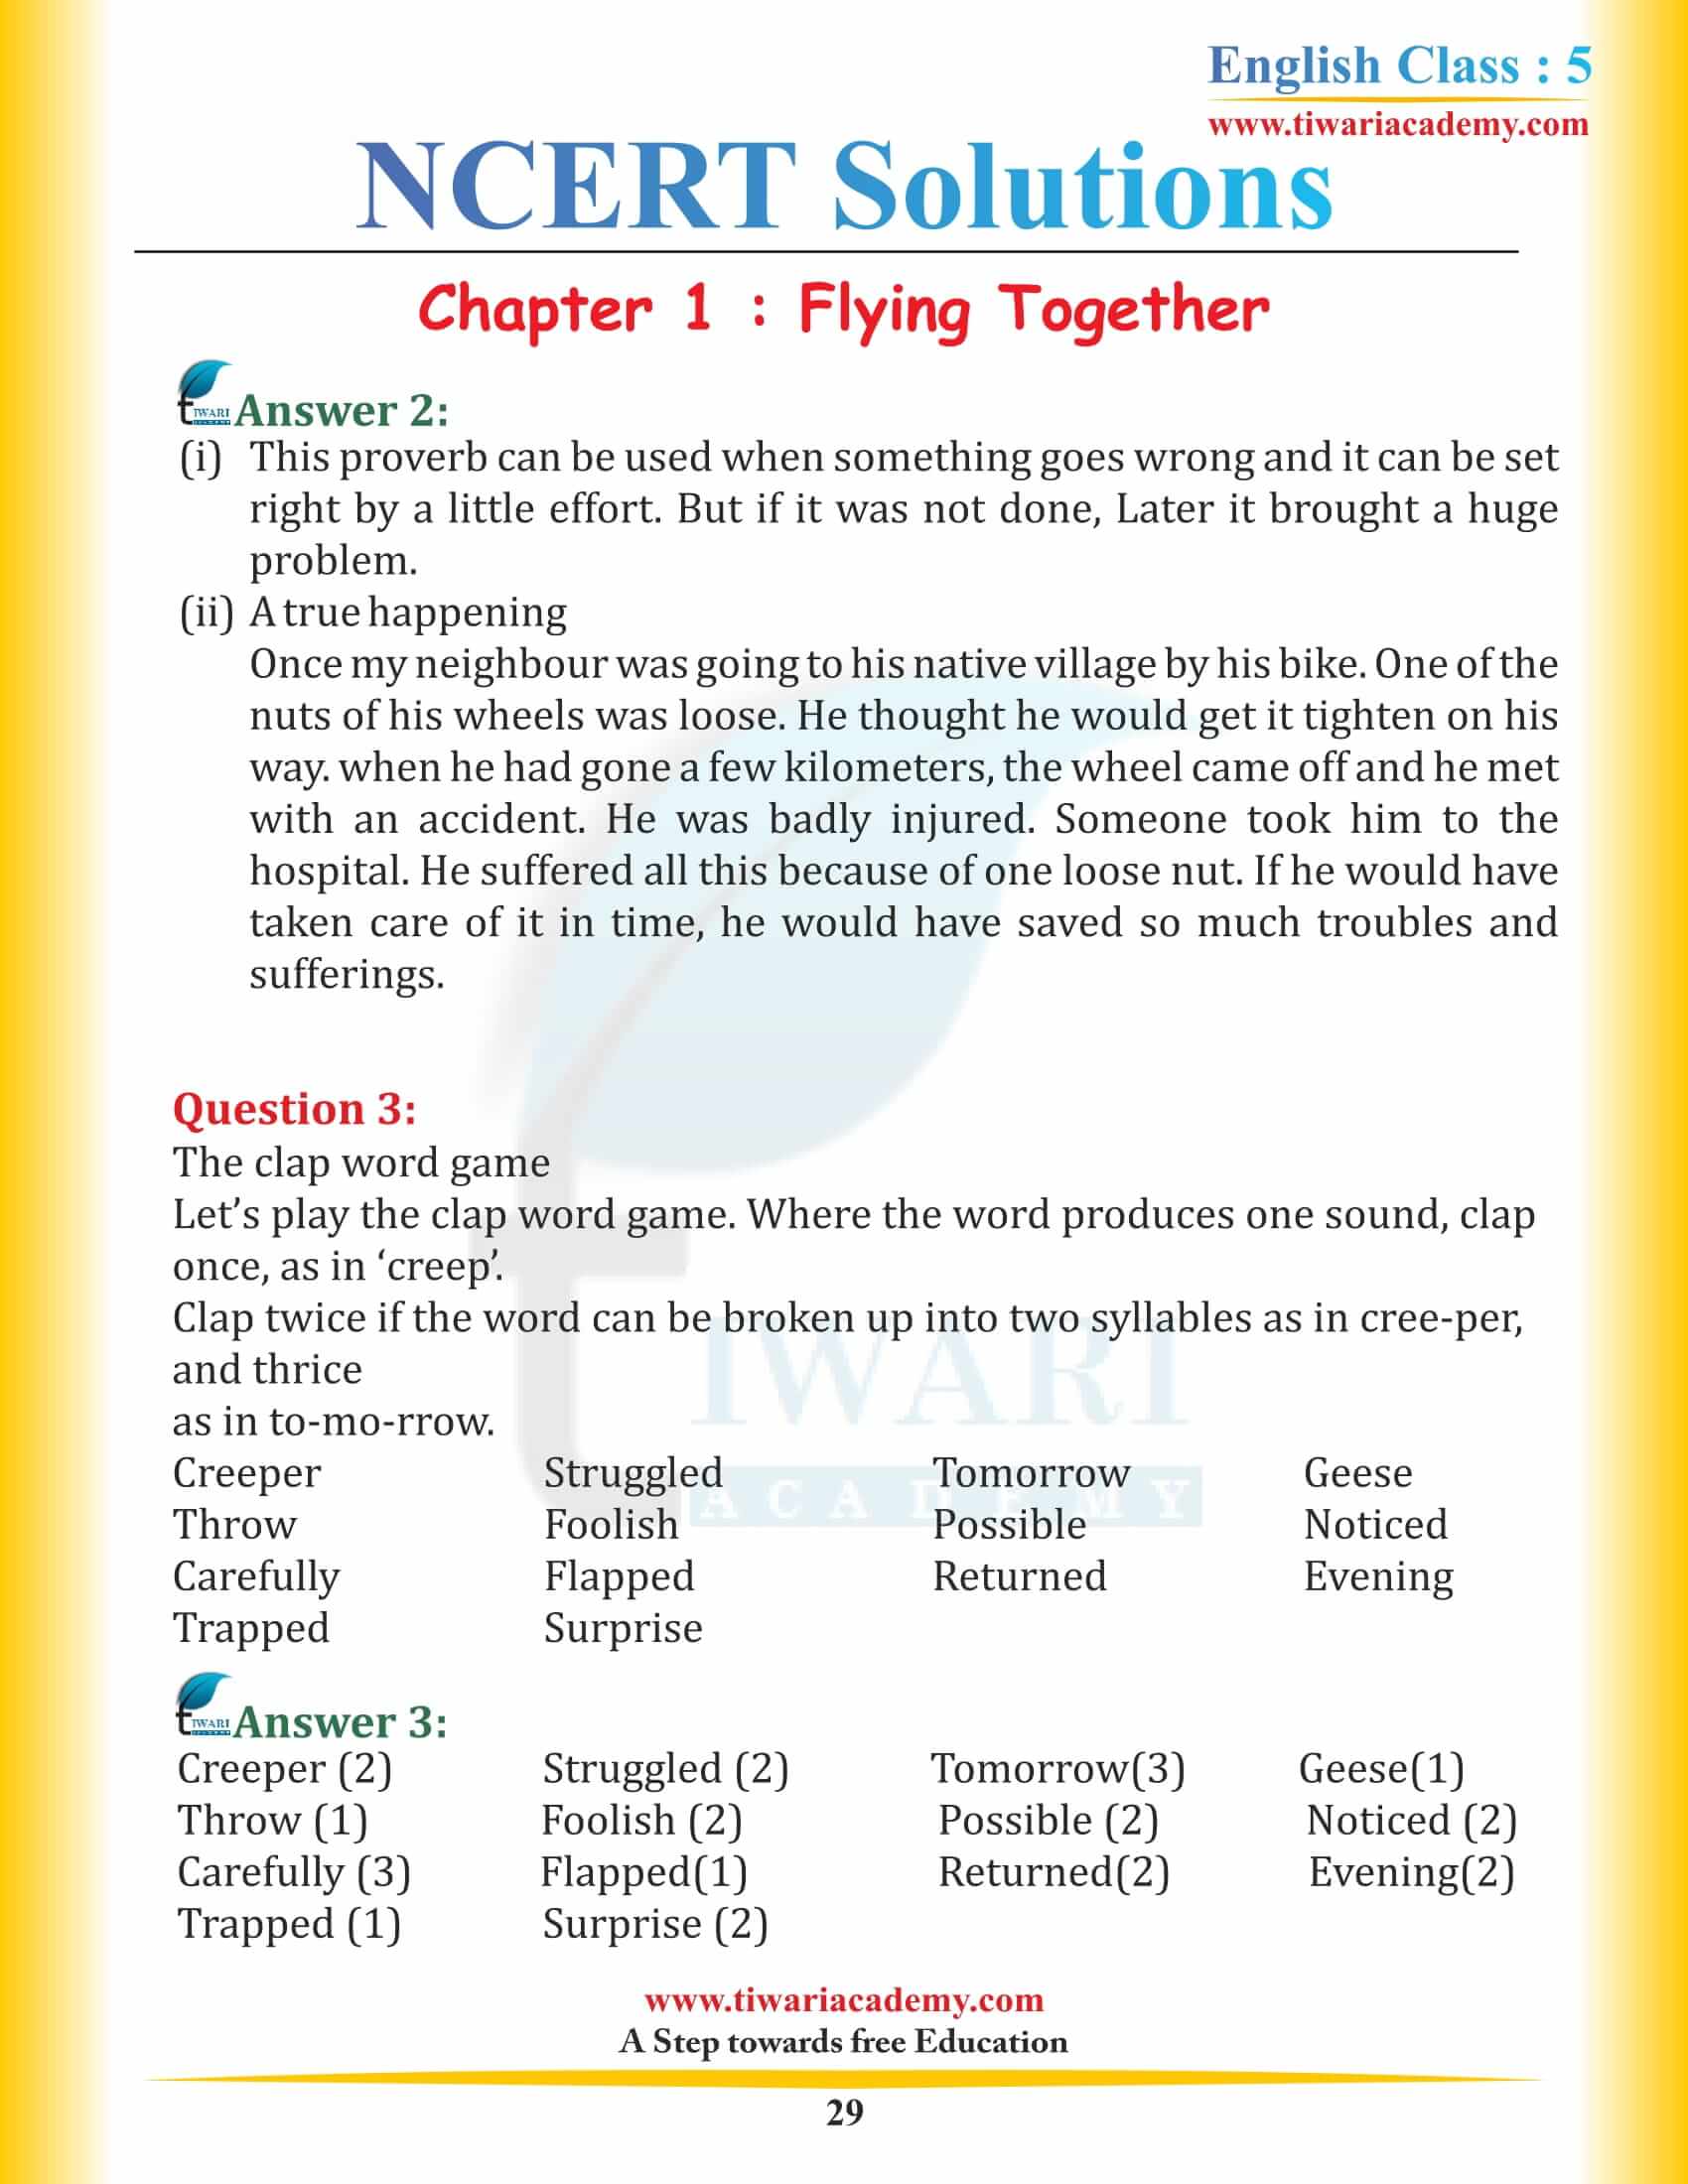 NCERT Solutions Class 5 English Chapter 1 all answers